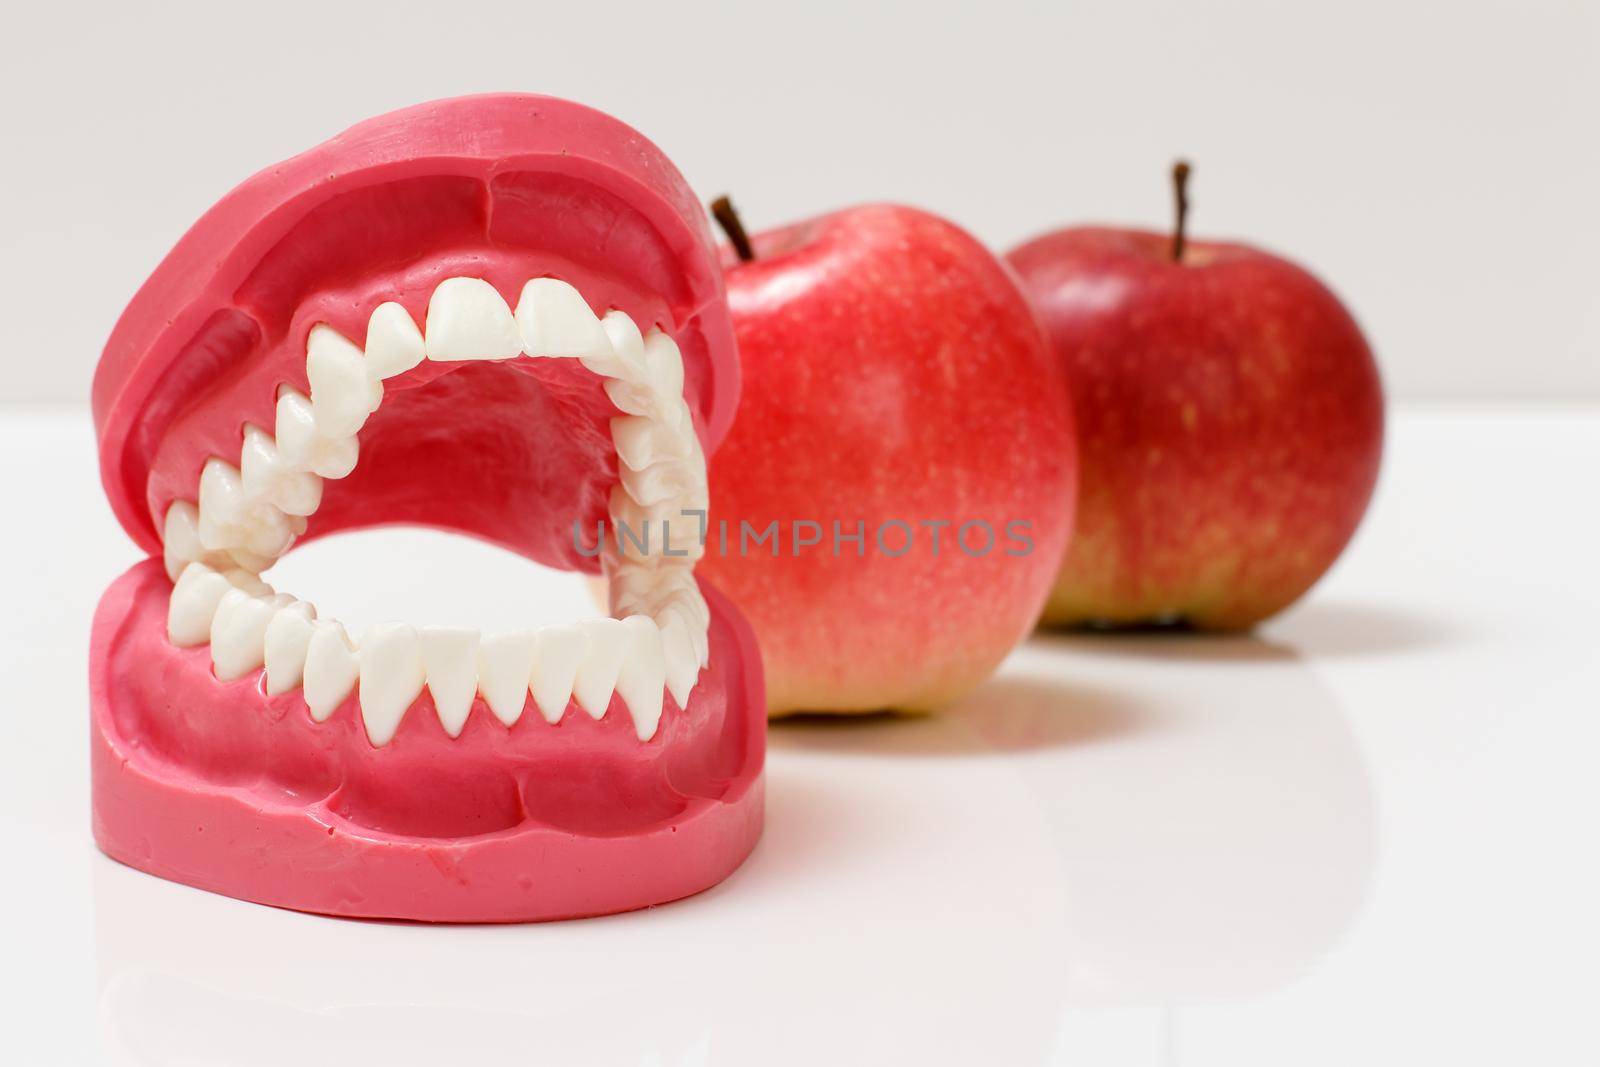 Layout of the human jaw with red apples on the white background.